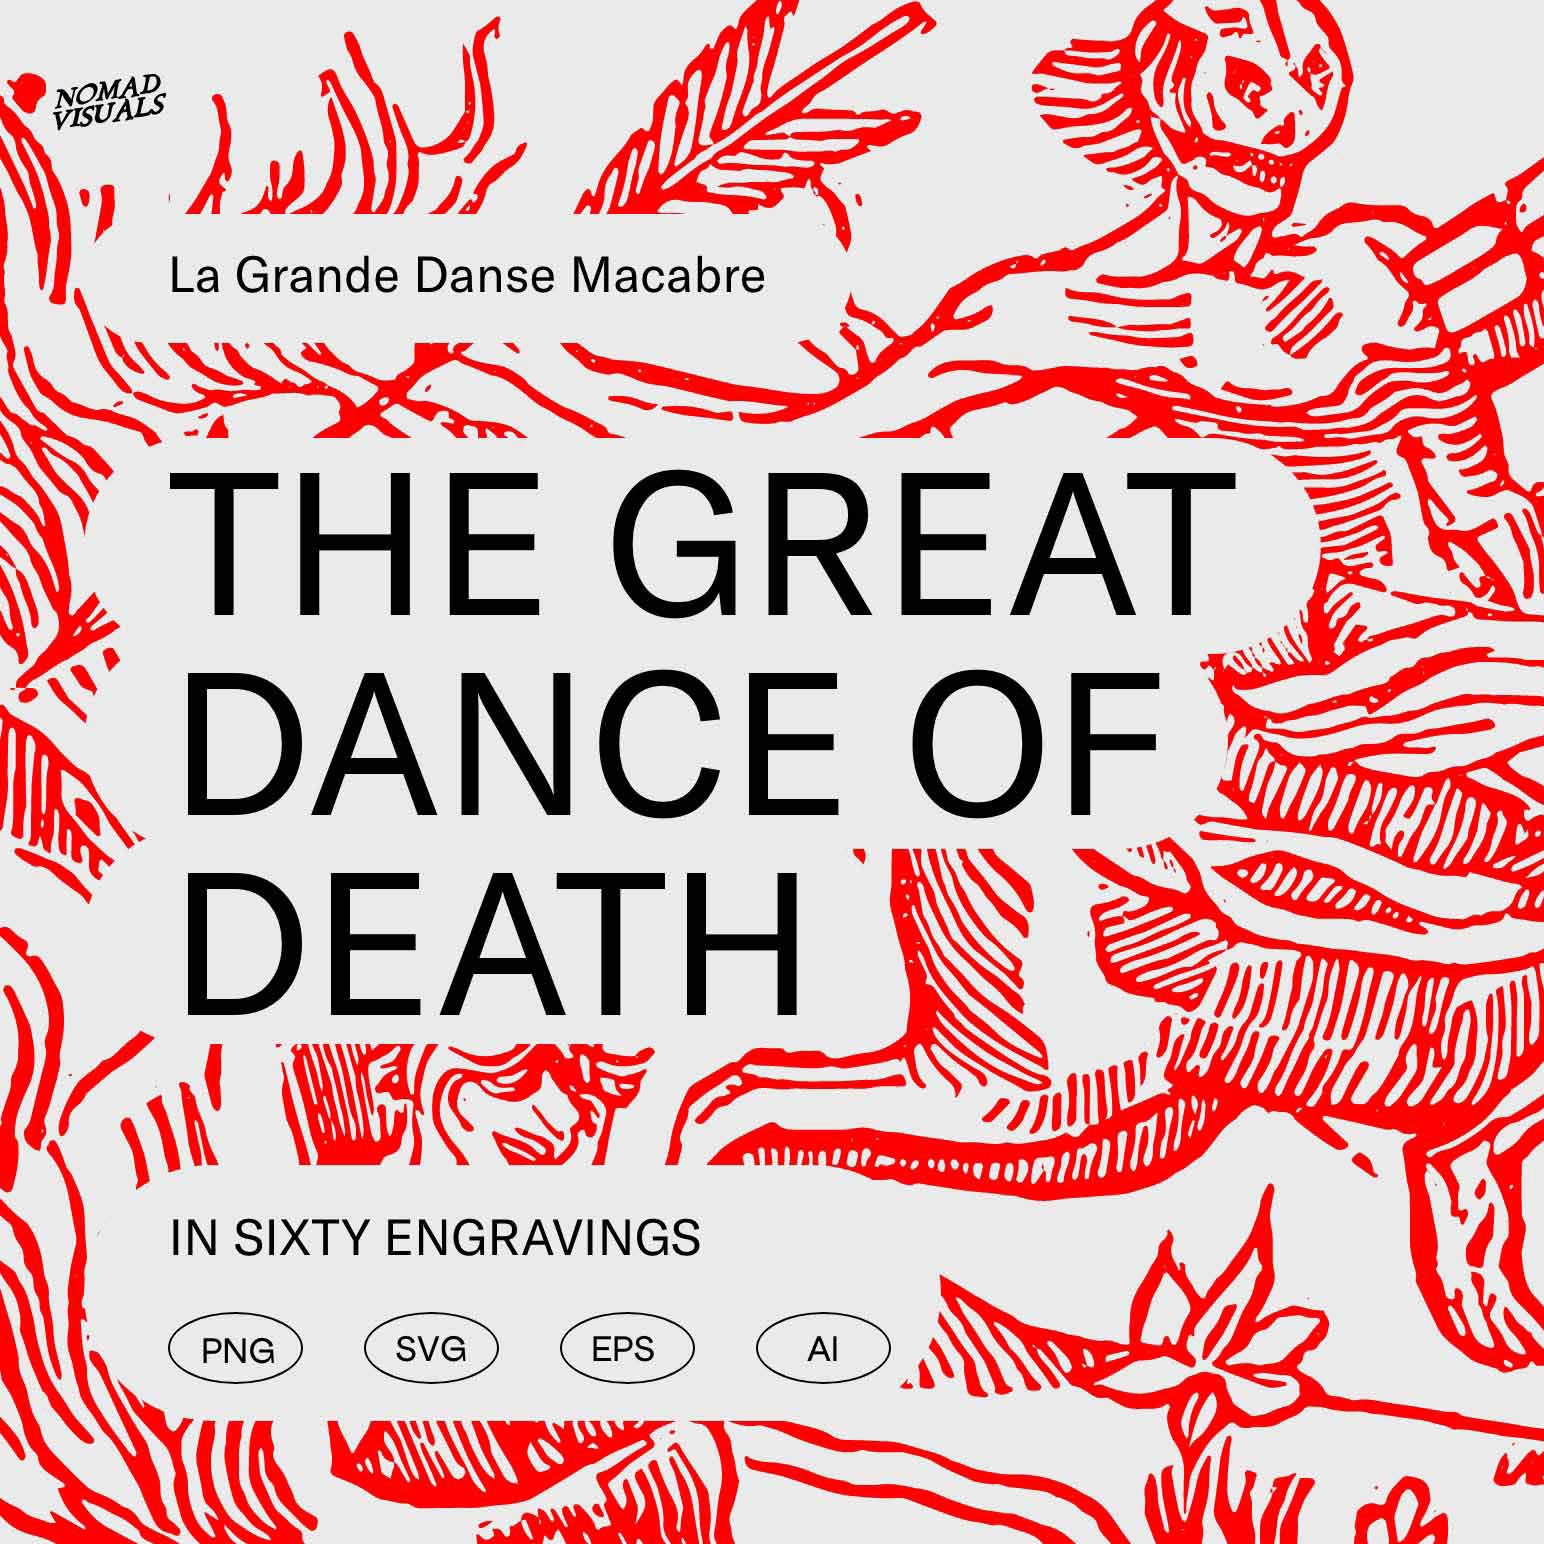 The Great Dance of Death